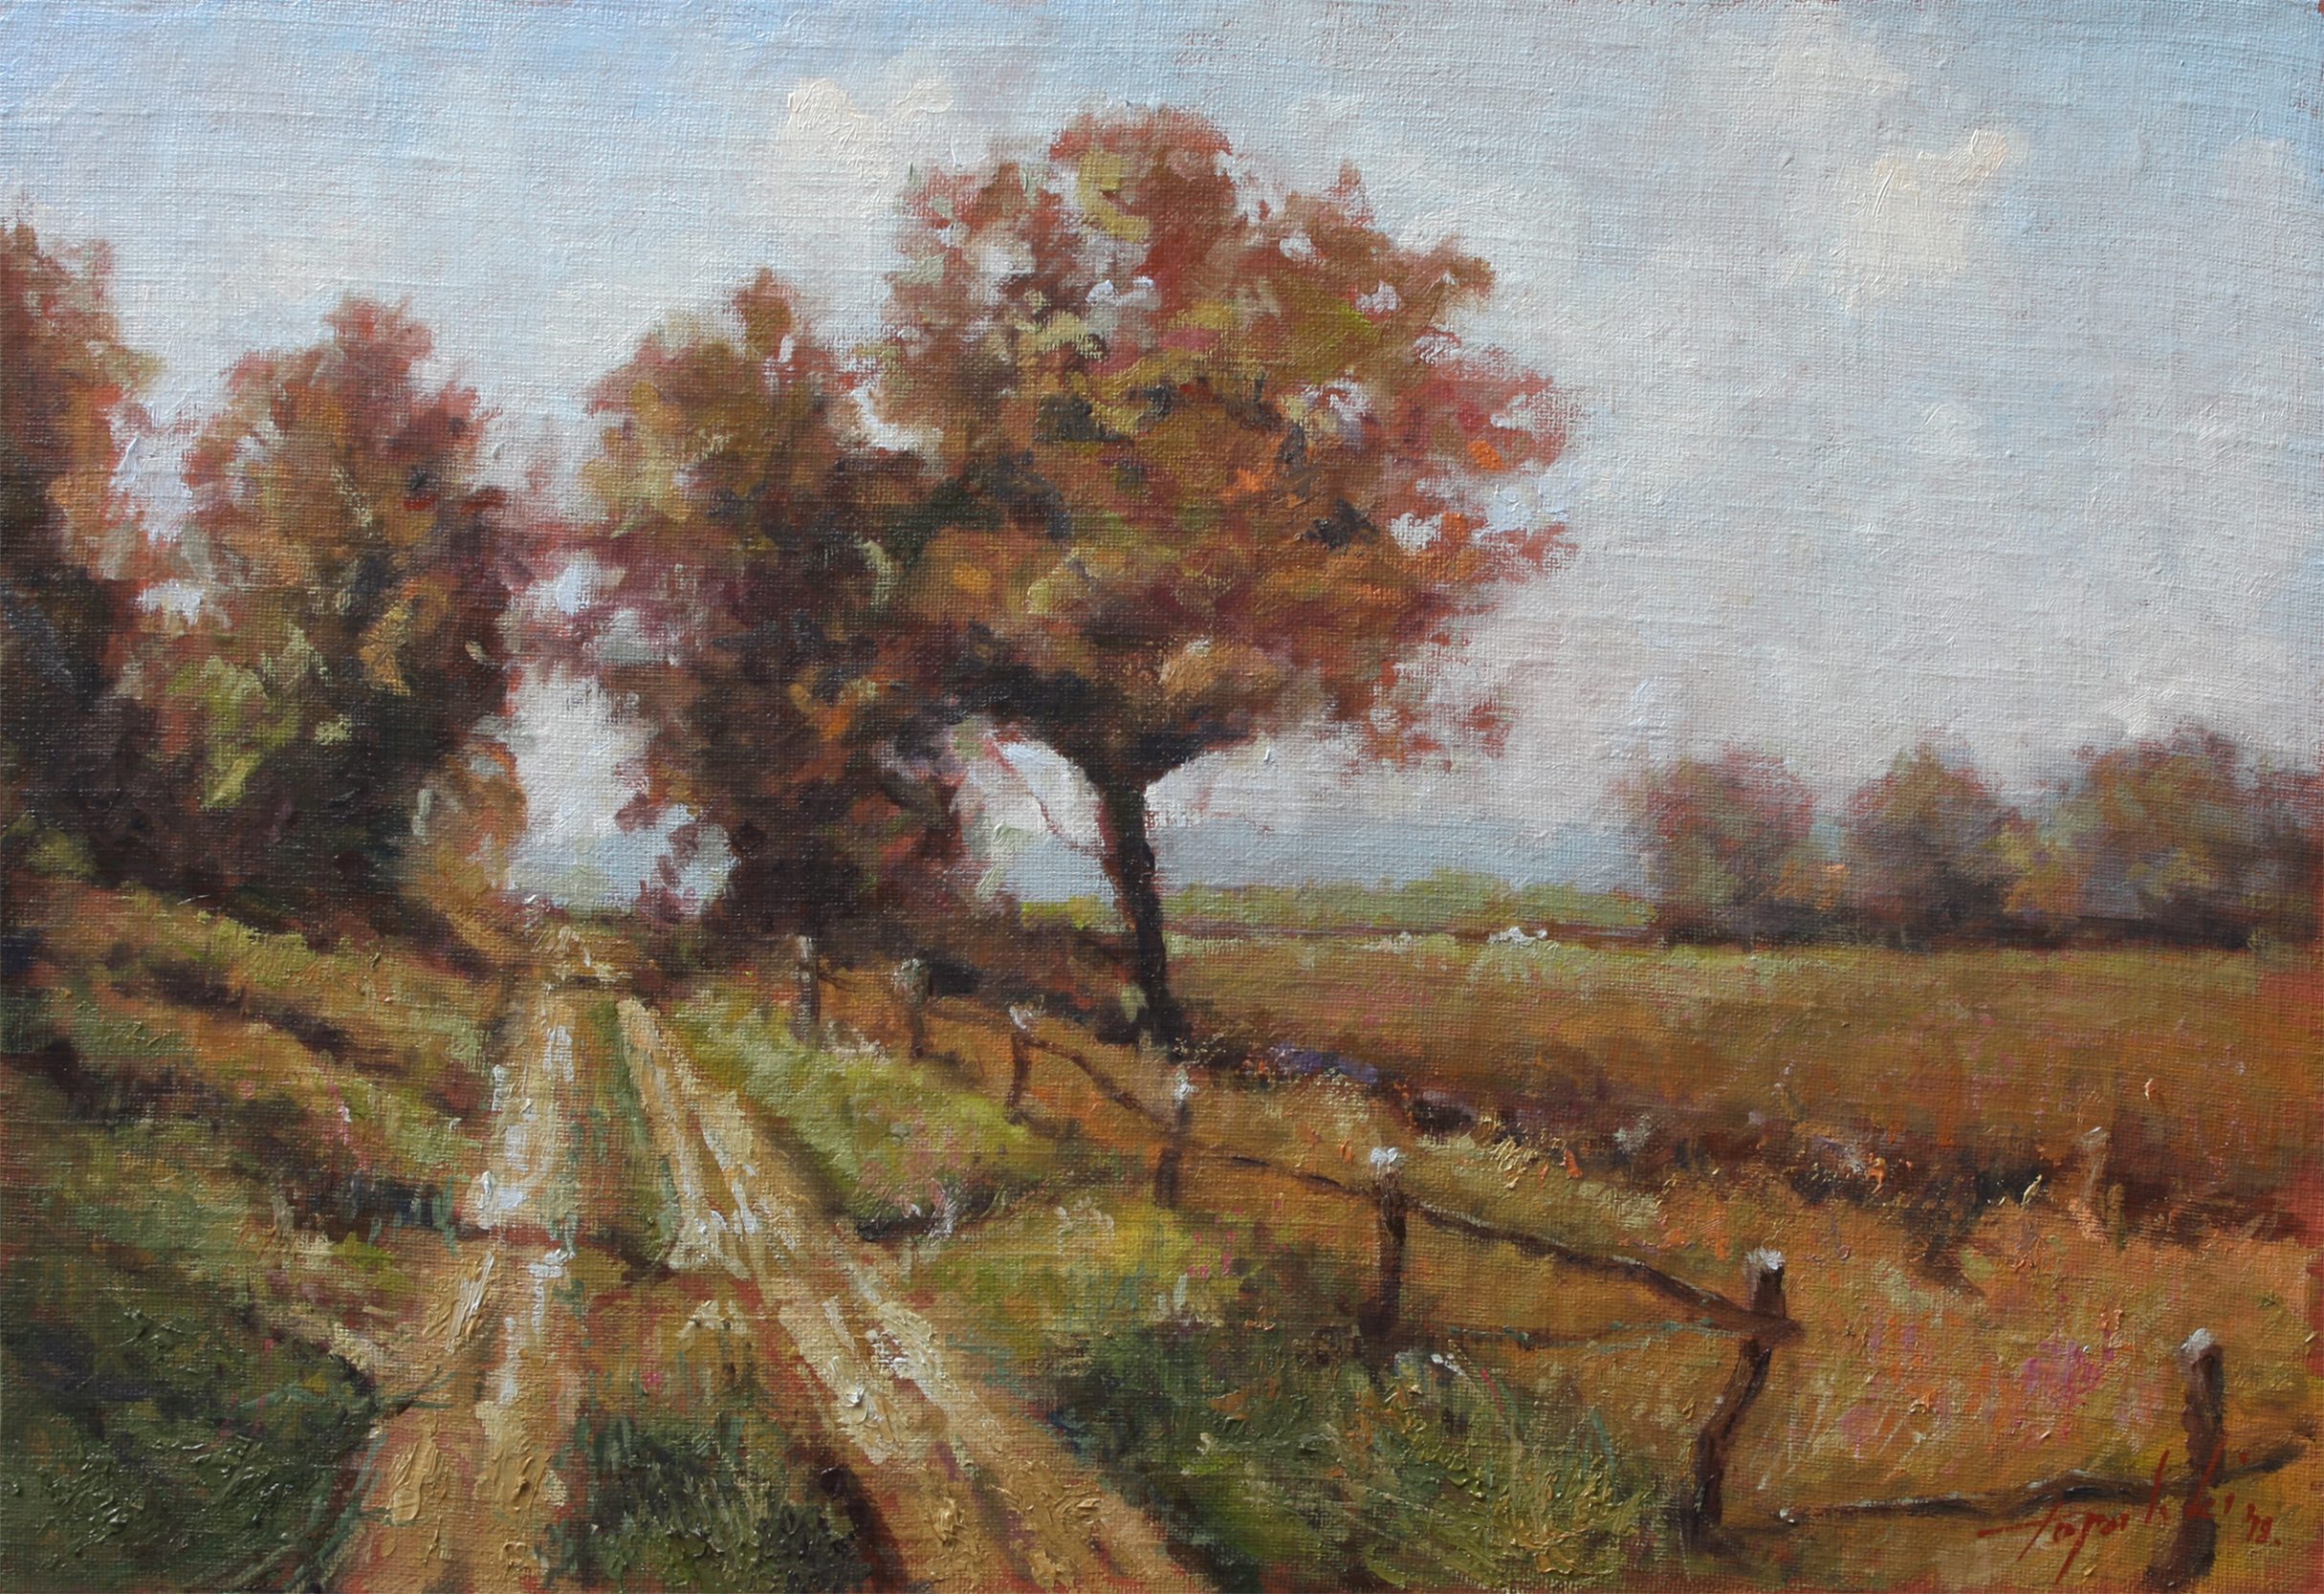 Country Road – Landscape Oil painting - Fine Arts Gallery - Original